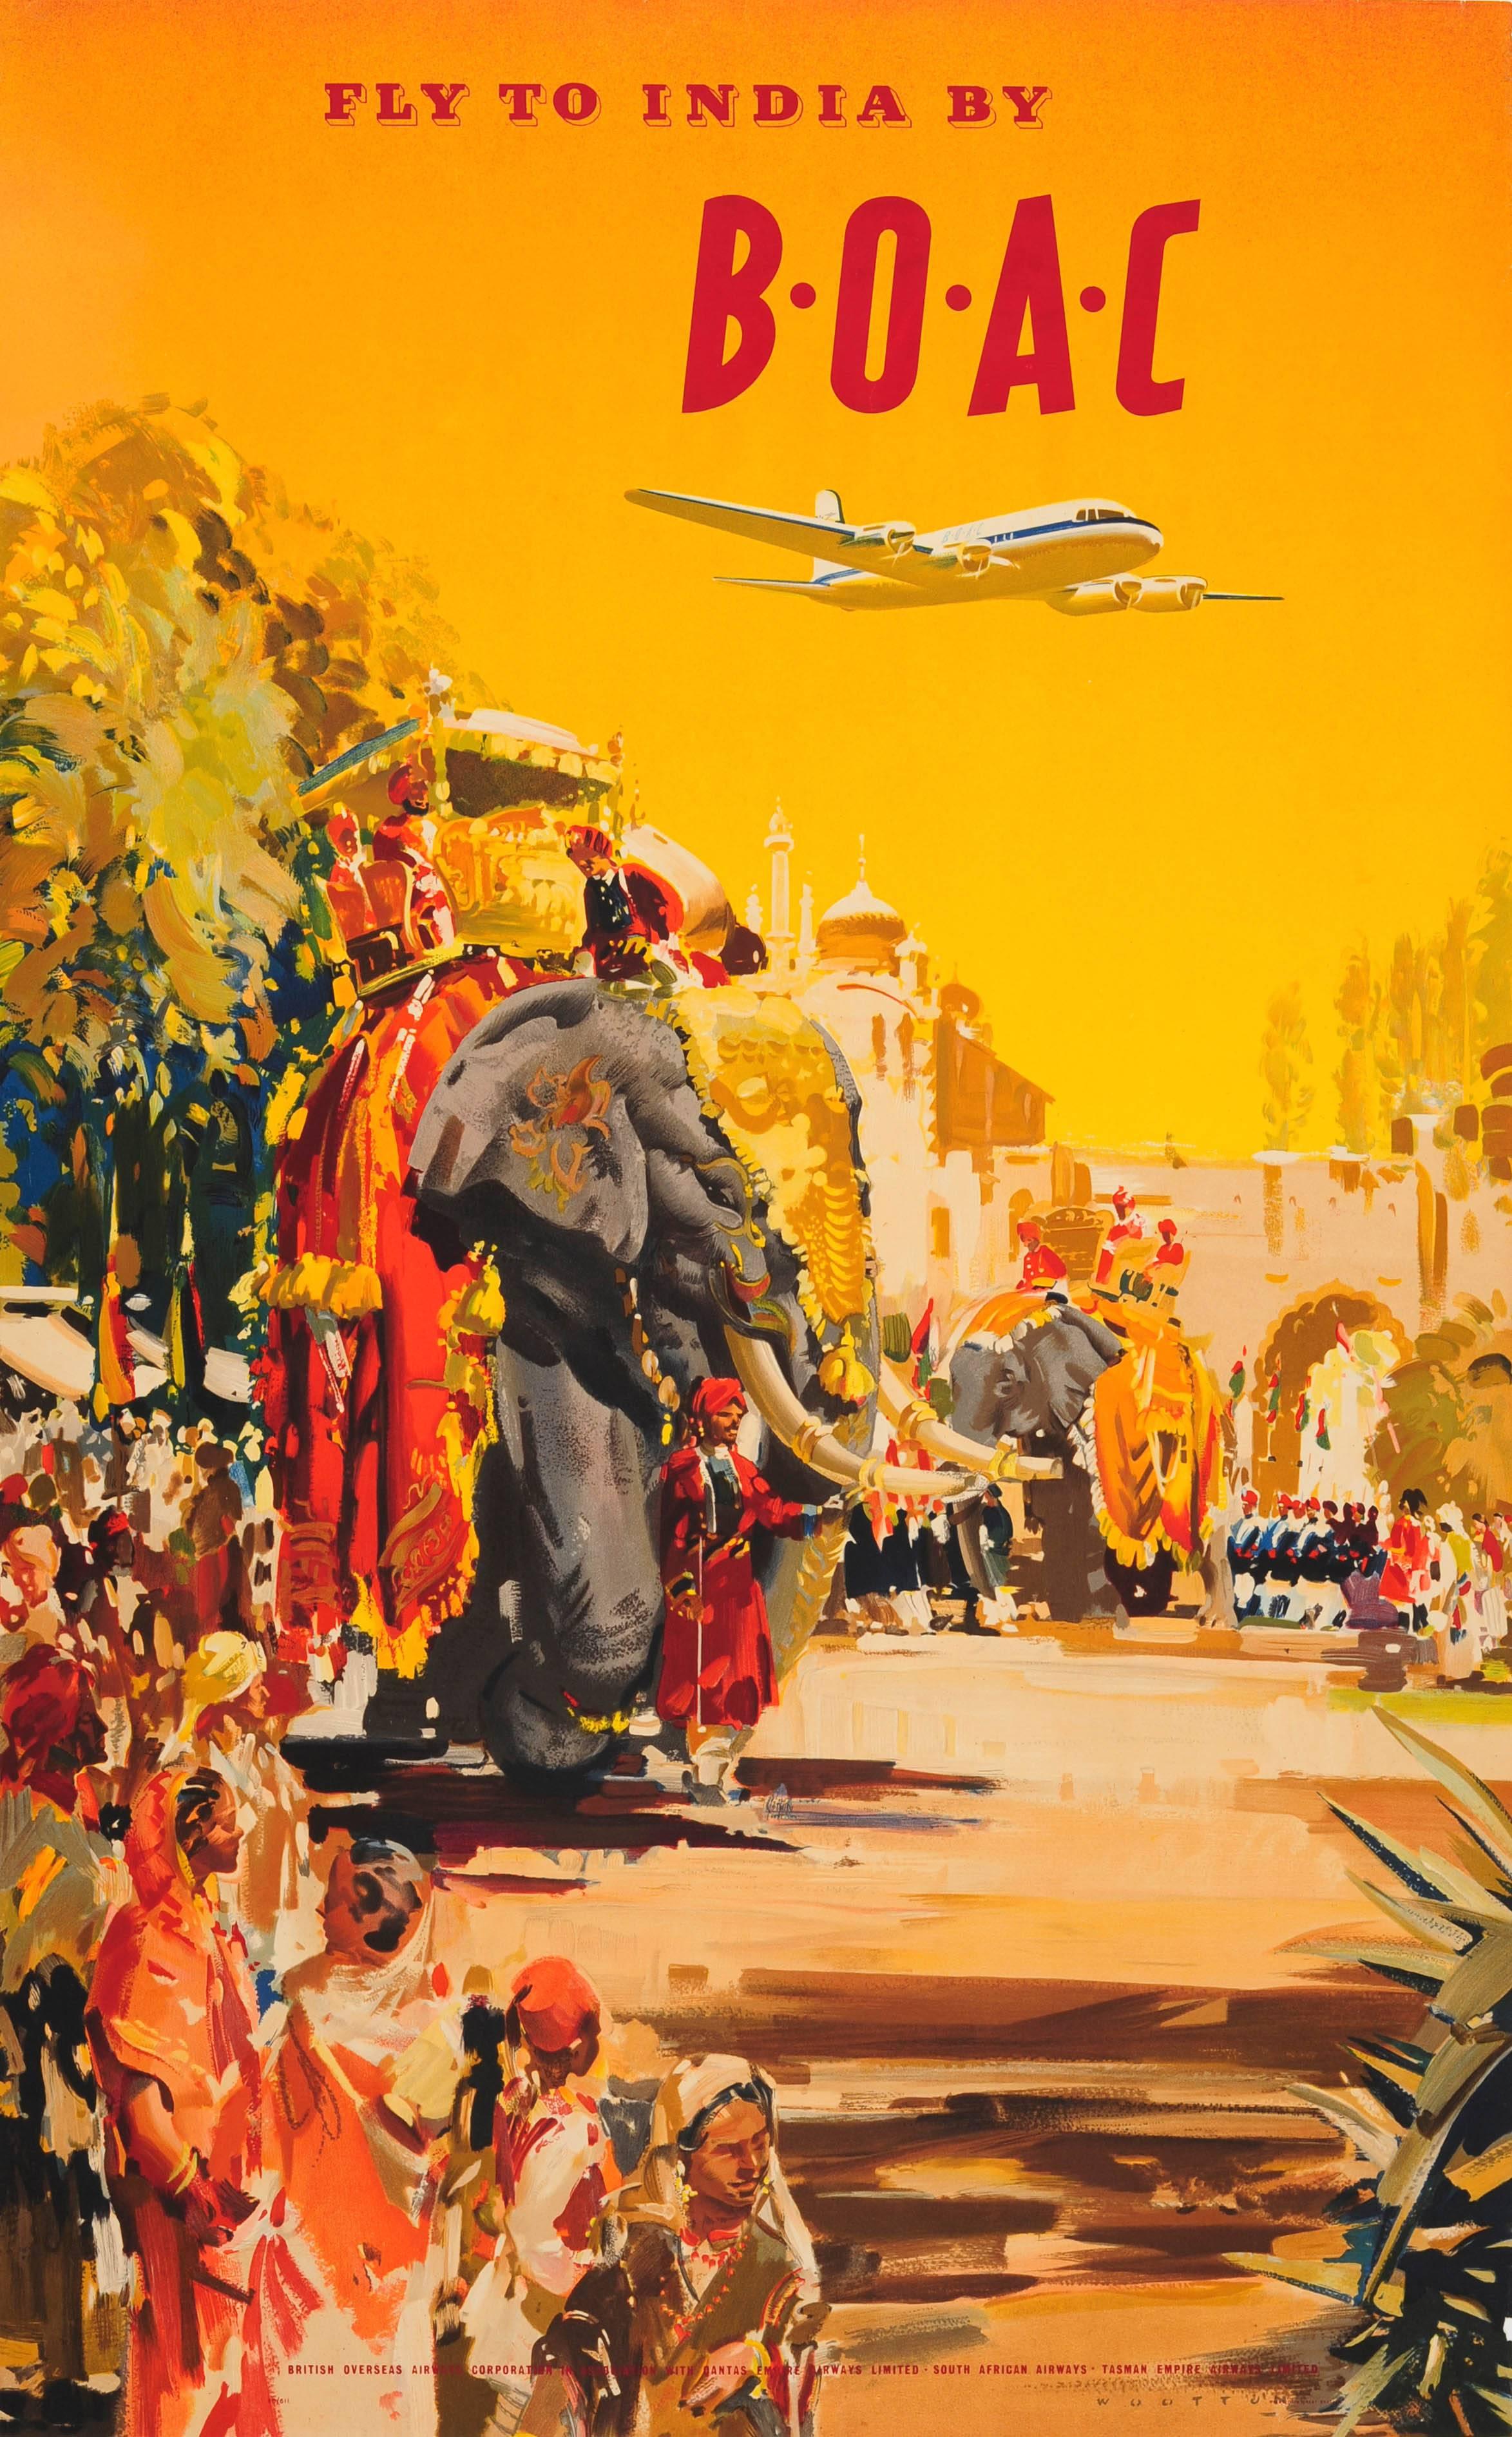 Frank Wootton Print - Original Vintage Airline Travel Advertising Poster - Fly To India By BOAC